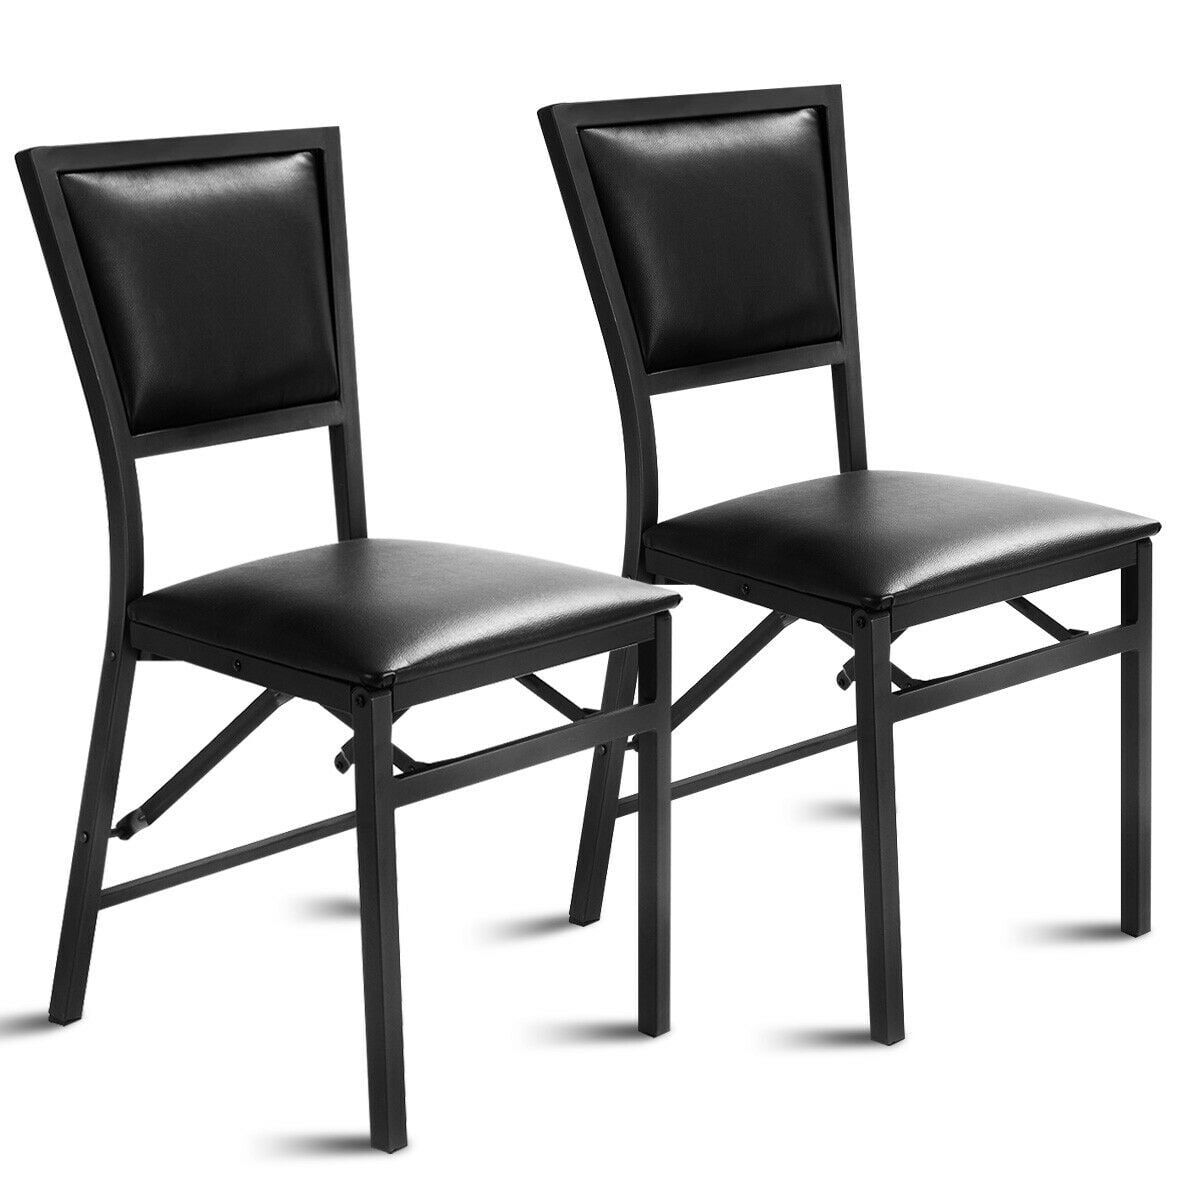 Costway Set Of 2 Metal Folding Chair Dining Chairs Home Restaurant